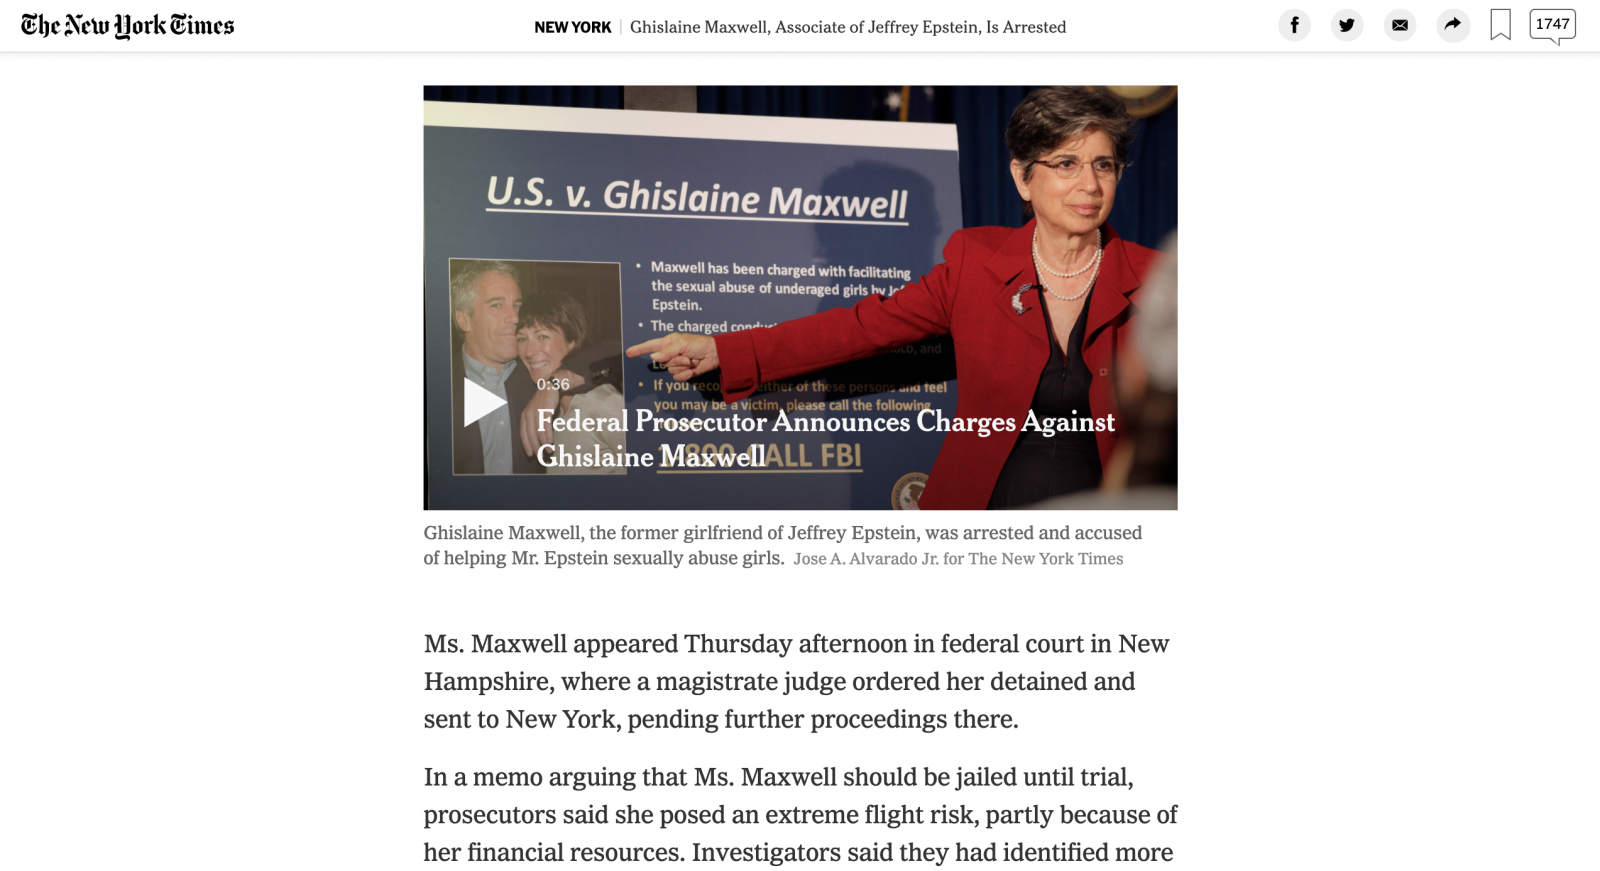 for The New York Times: Ghislaine Maxwell, Associate of Jeffrey Epstein, Is Arrested